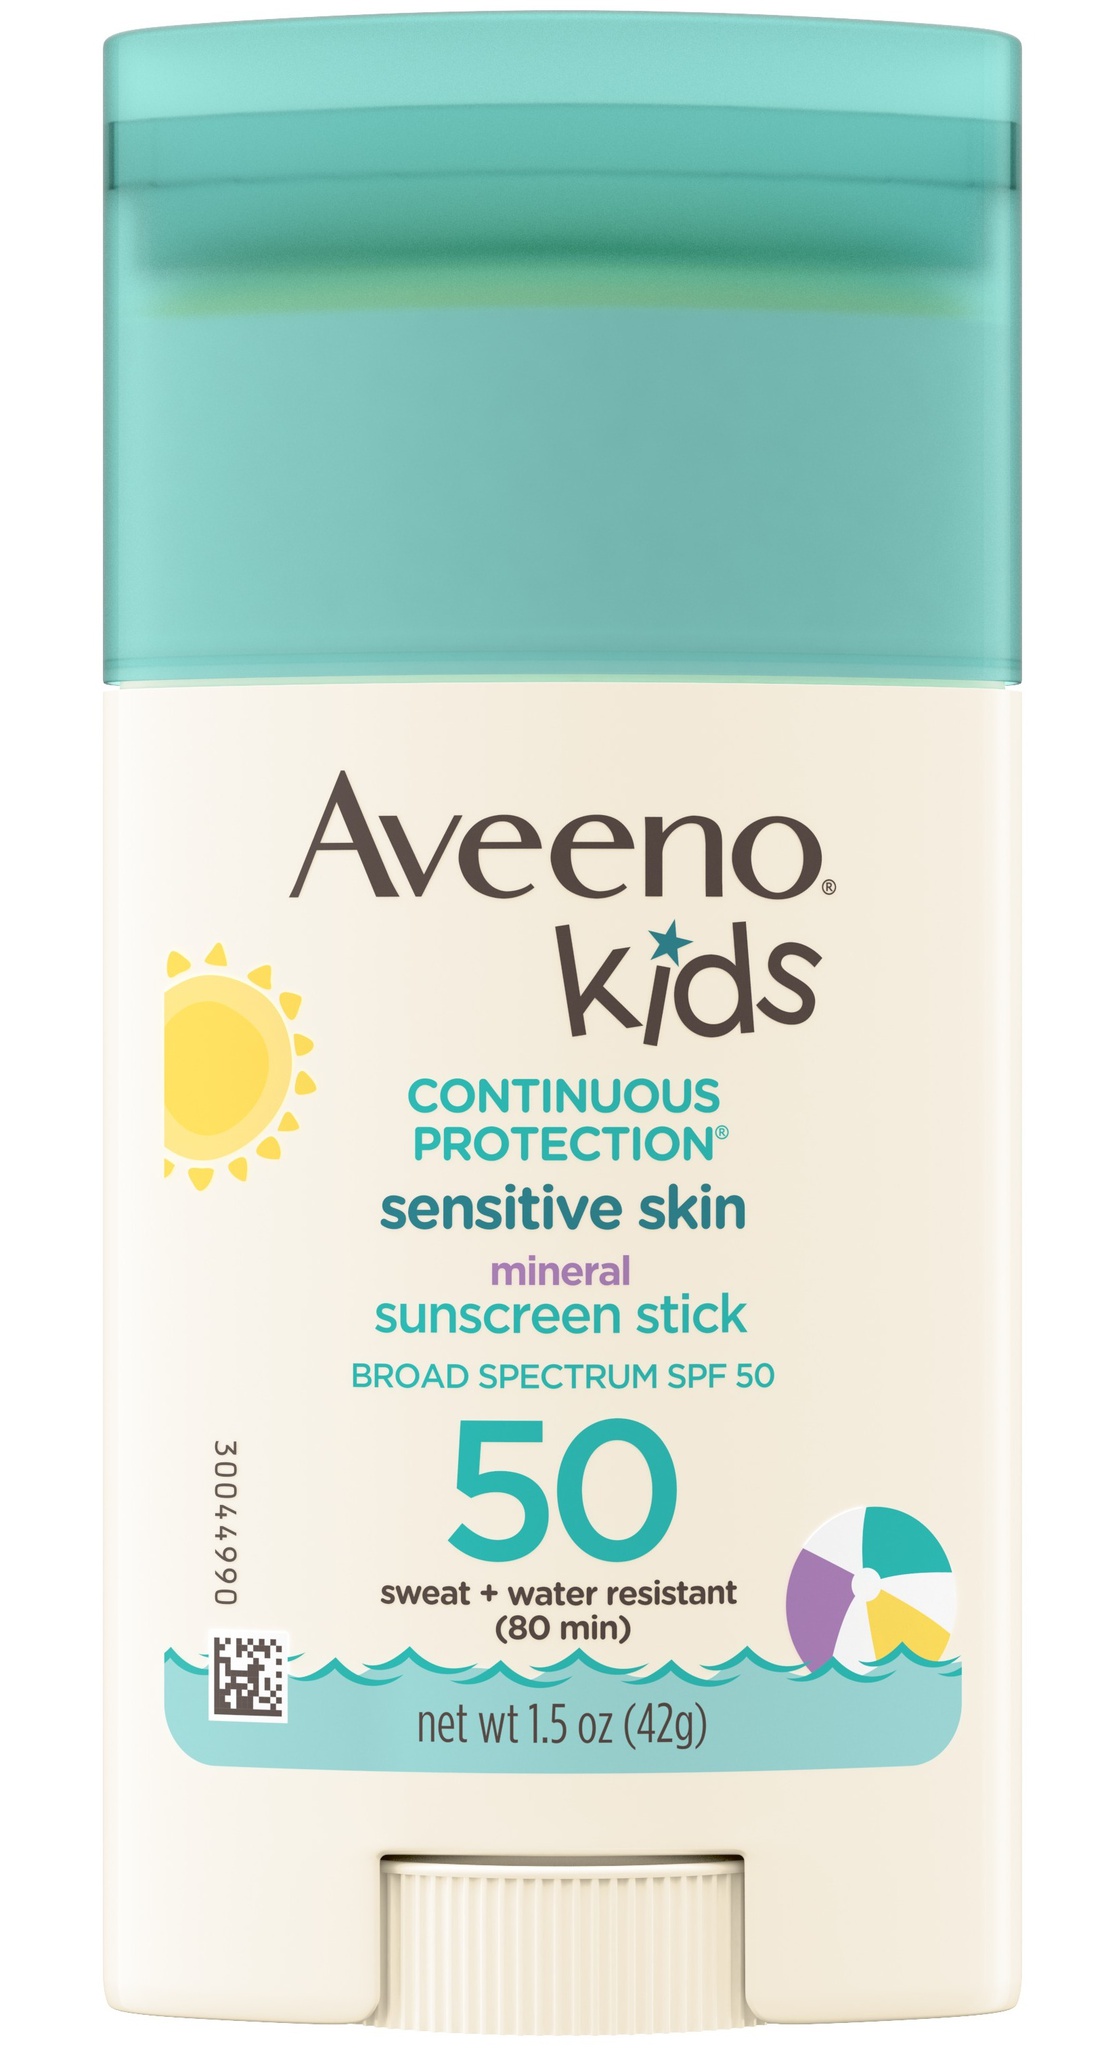 Aveeno Kids Continuous Protection® Mineral Sunscreen Stick, SPF 50